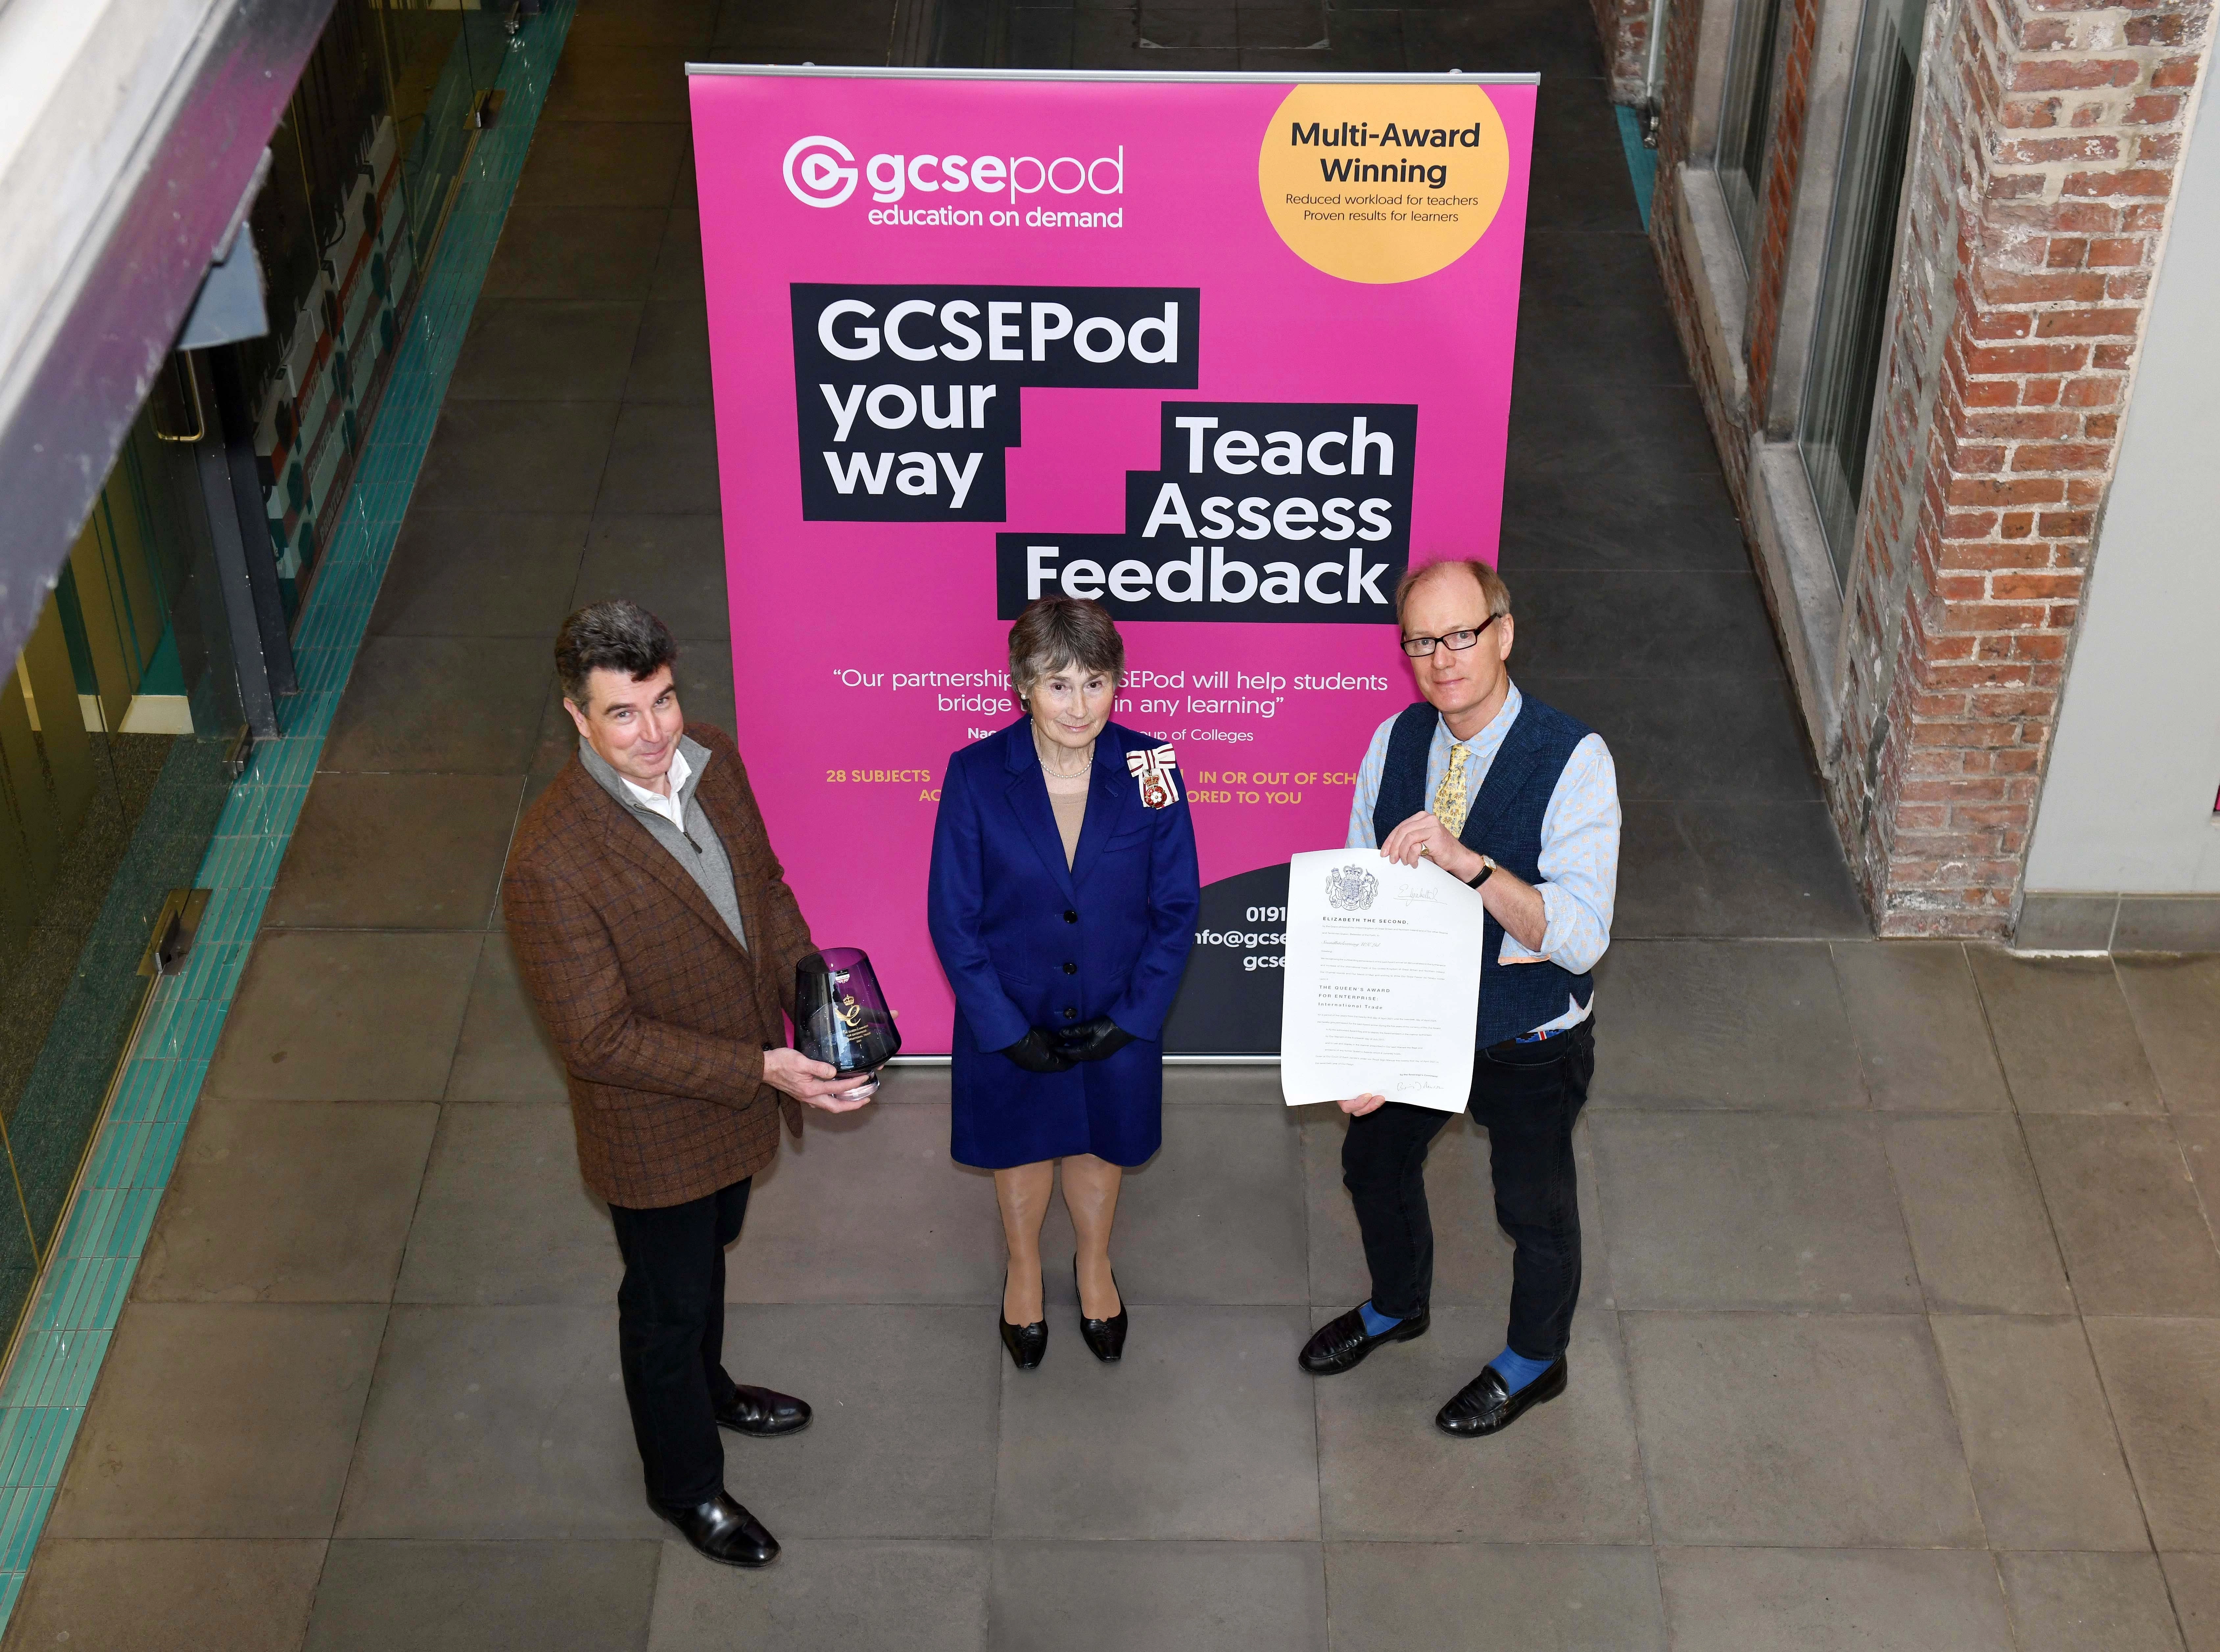 Co-founders of GCSEPod, Anthony Coxon and Ian Thompson are presented with The Queen's Award for Enterprise: International Trade by the Lord-Lieutenant of Tyne and Wear, Mrs Susan Winfield